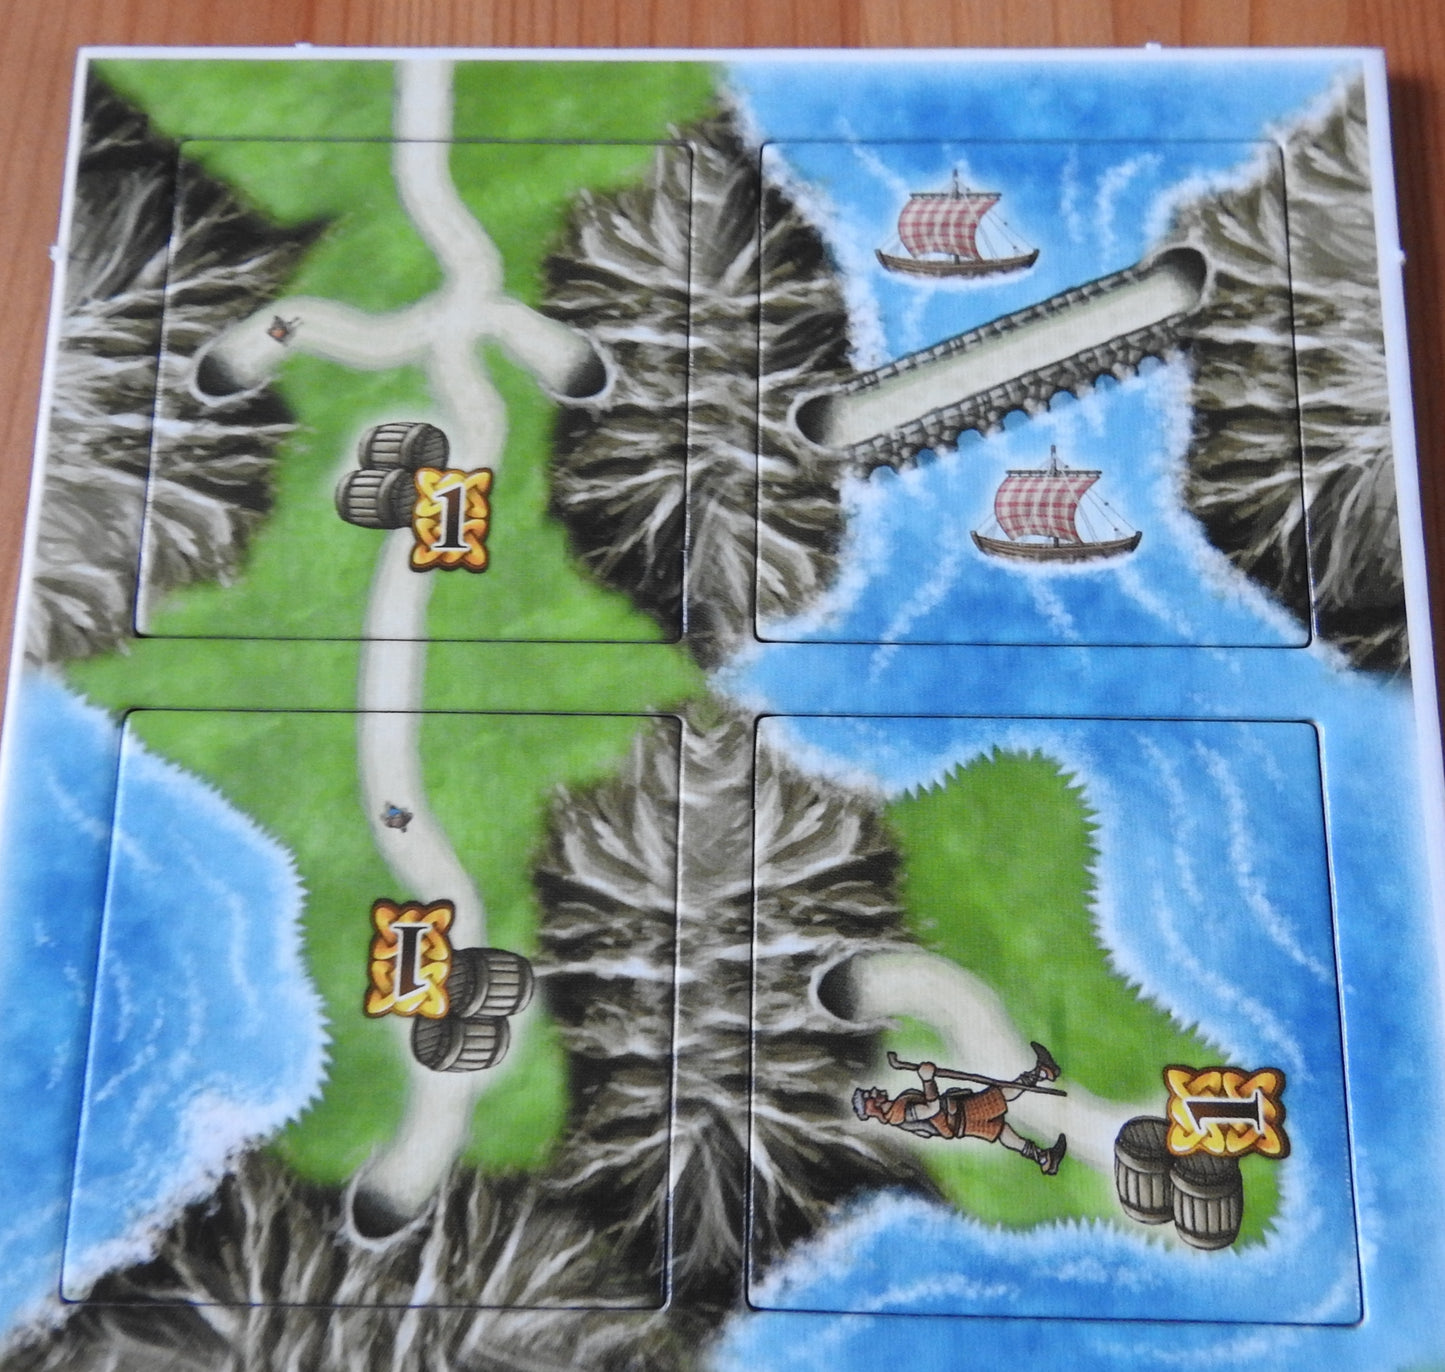 A view of some more tiles, with boats sailing in the lochs and whisky barrels aplenty!